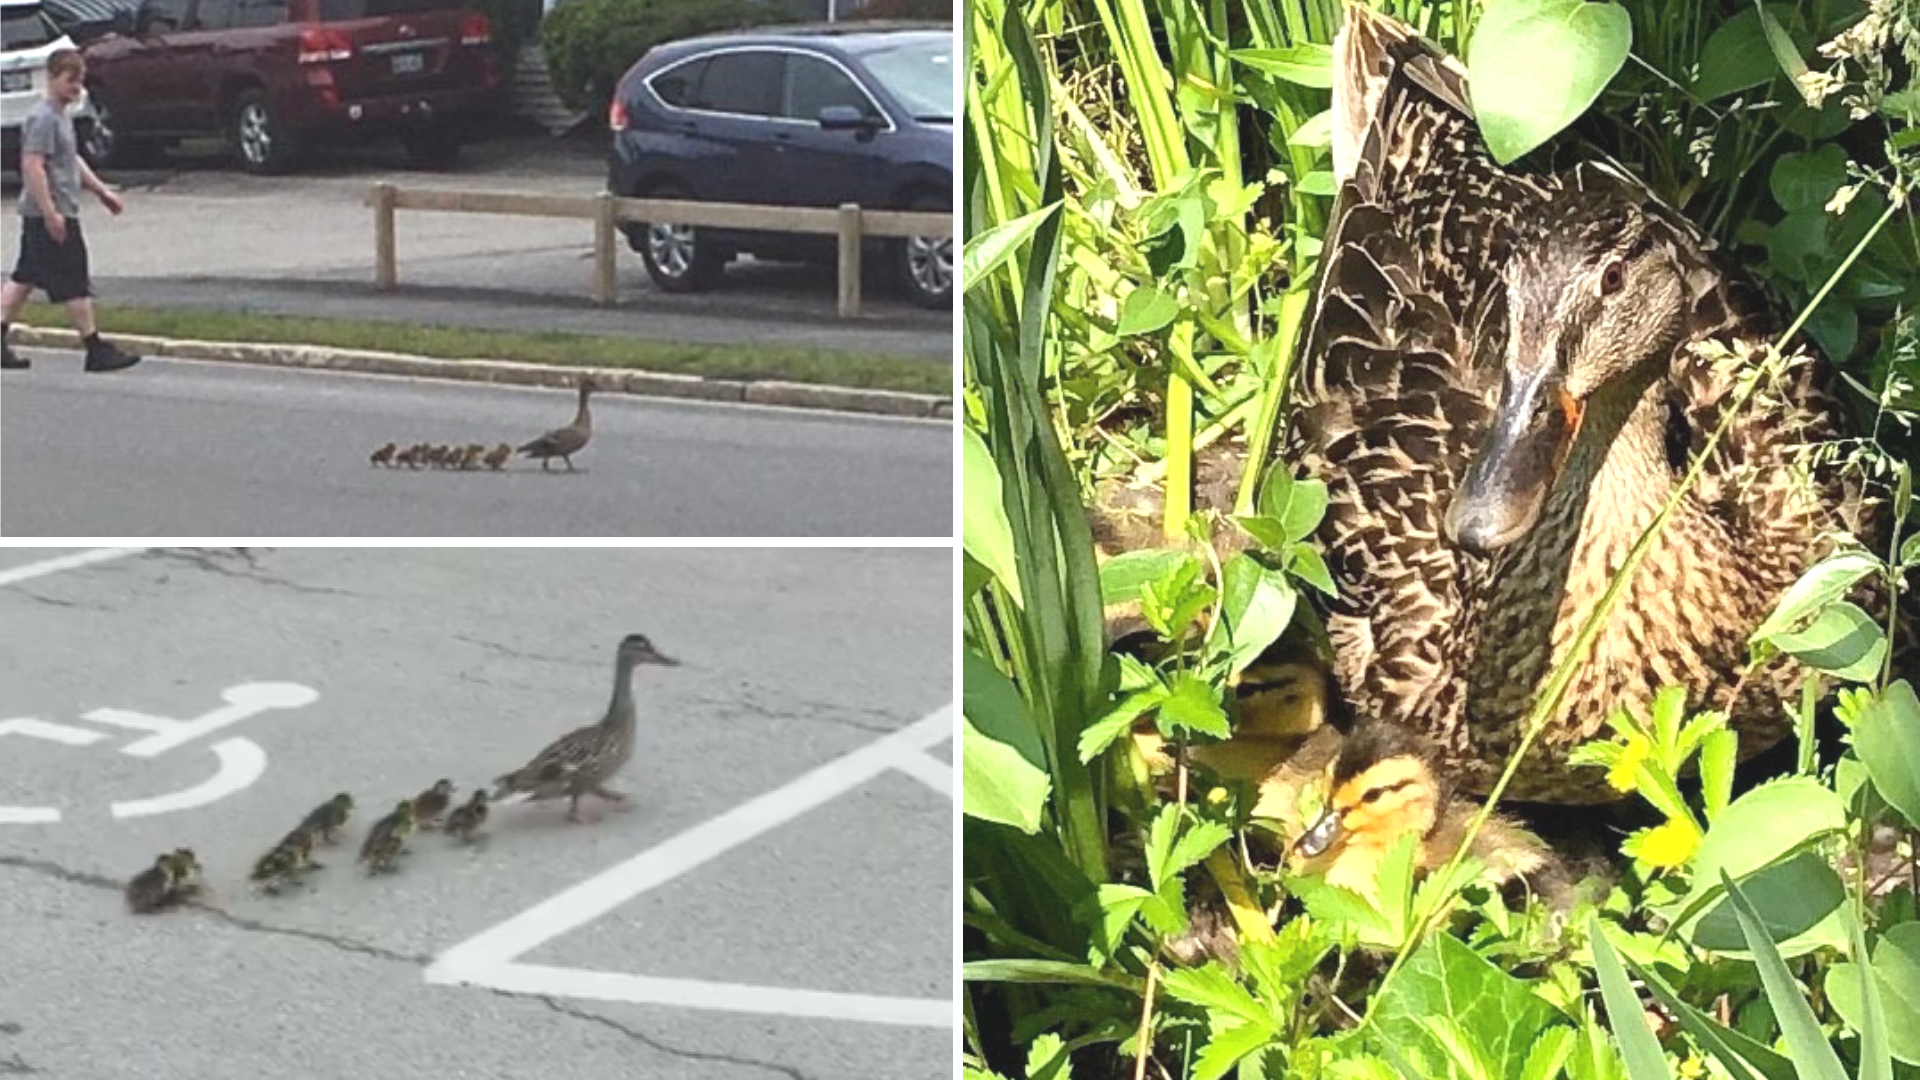 Staff and patrons at Parker's restaurant in Portland helped a family of freshly hatched ducks cross two major streets and travel through several backyards to get to a nearby pond.